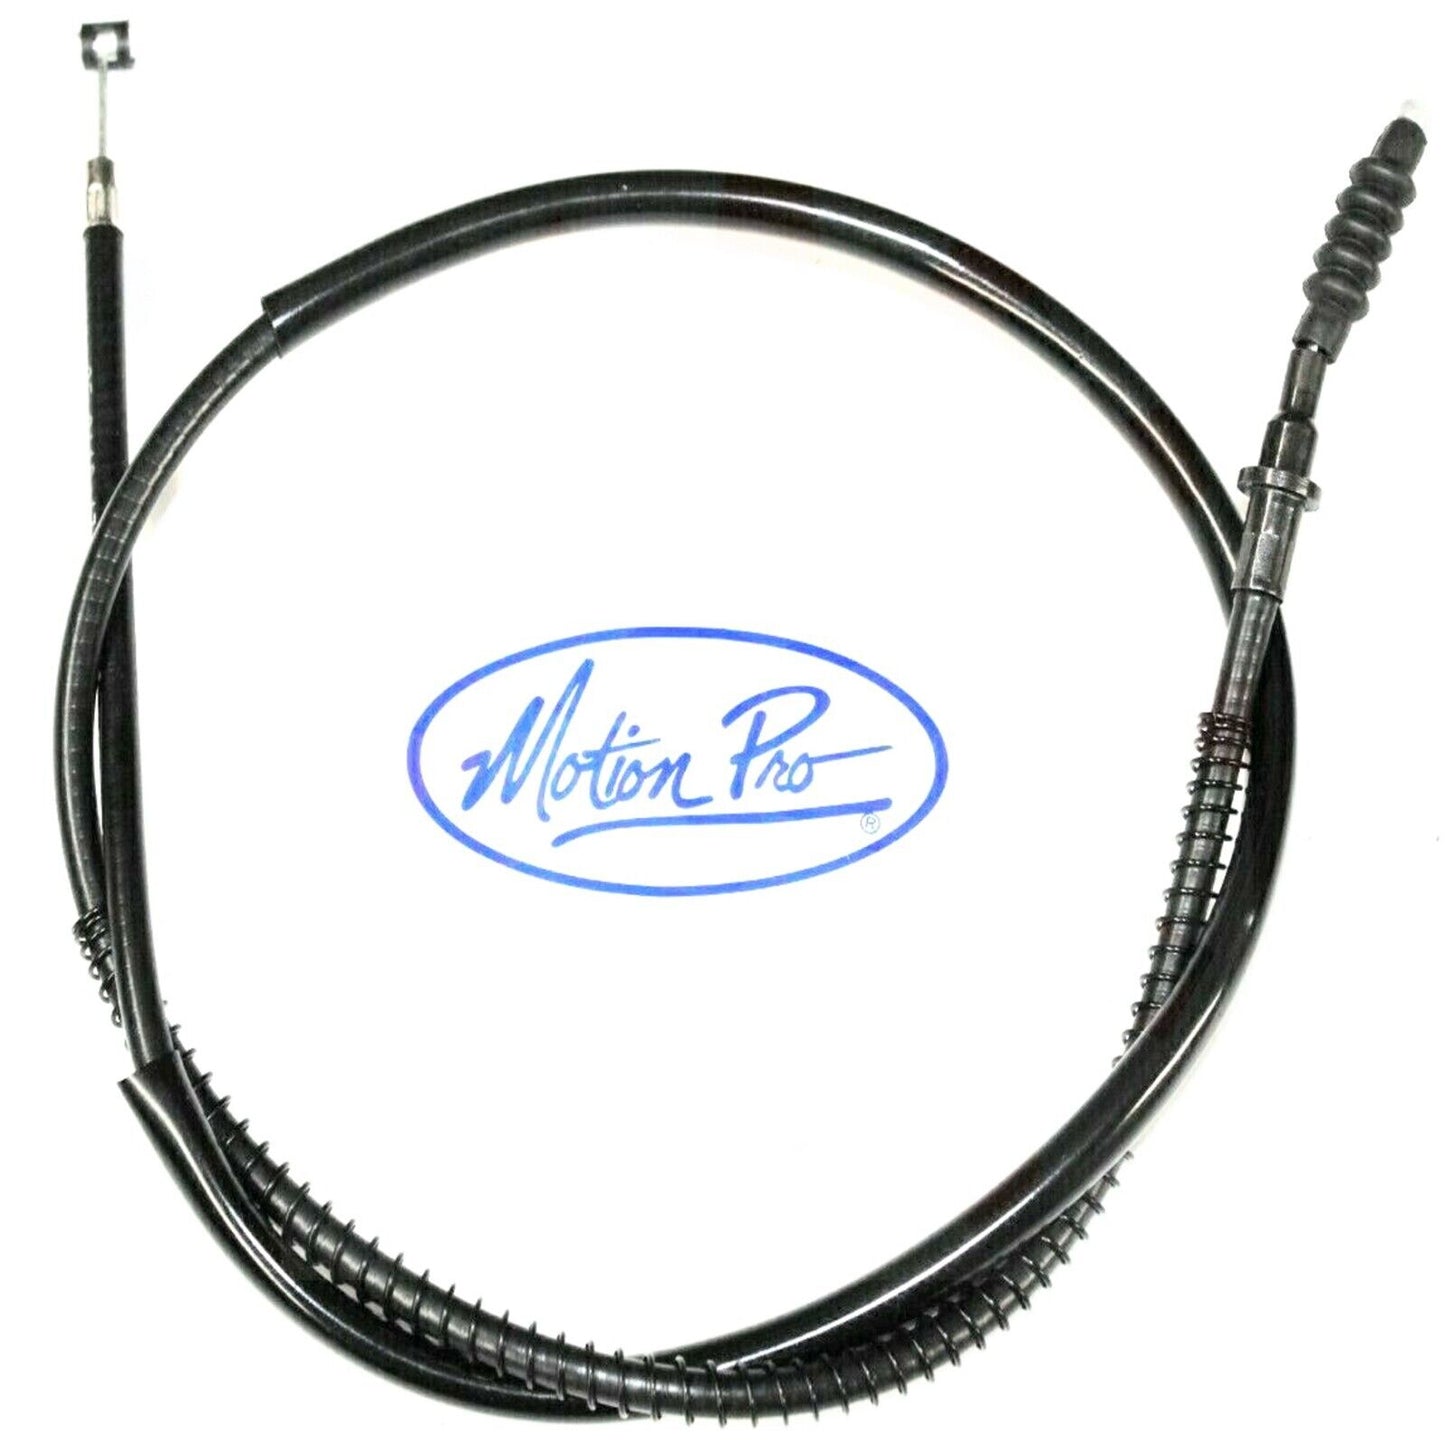 1988-2006 Yamaha 200 Blaster MOTION PRO Clutch Cable 05-0119 FAST FREE SHIPPING